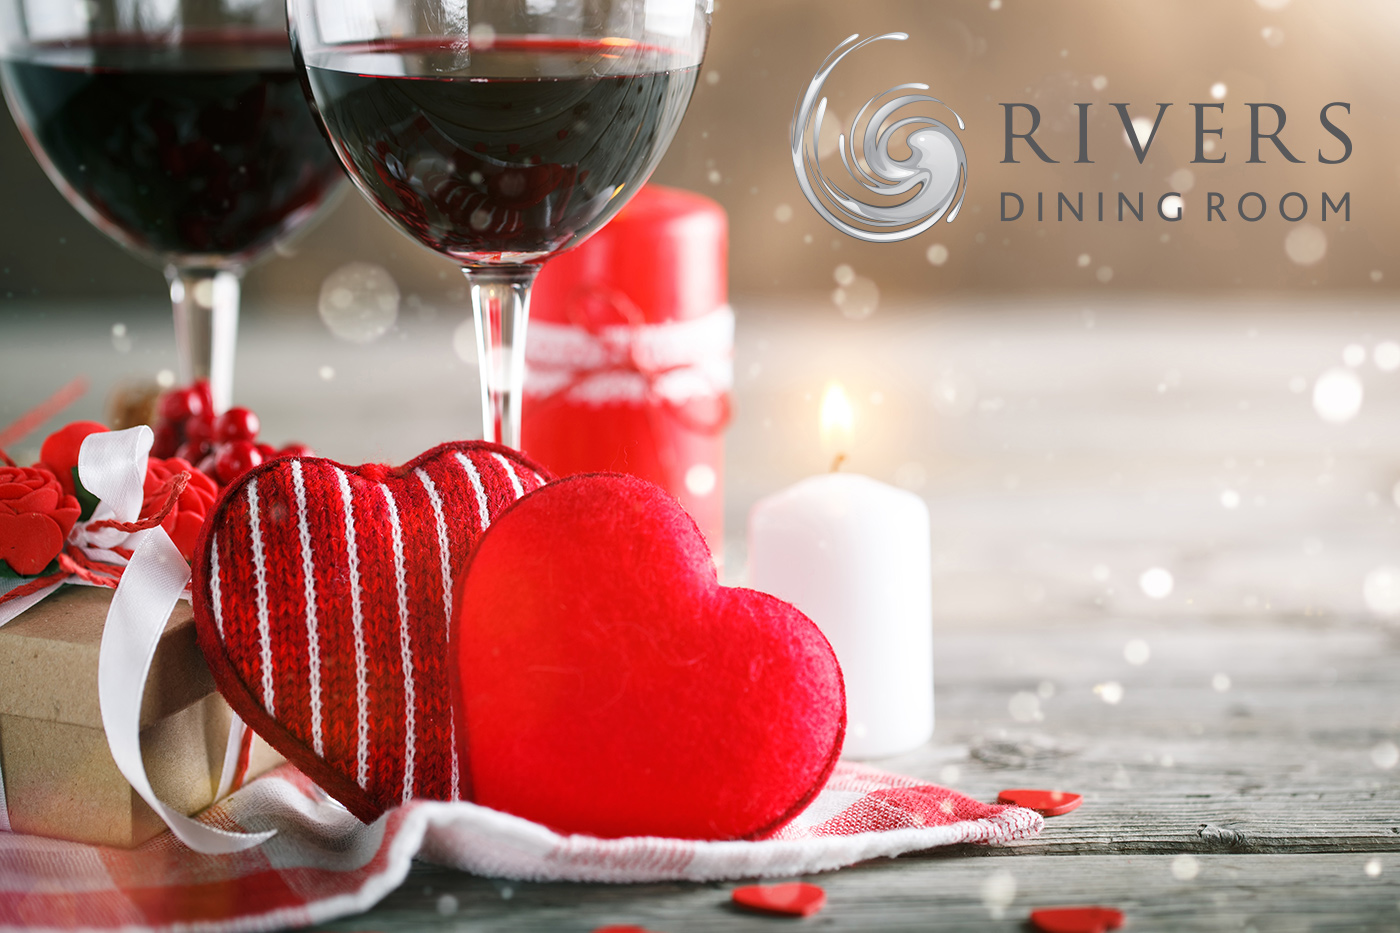 Spice up your romance with a Valentine's gourmet meal at Rivers Dining Room